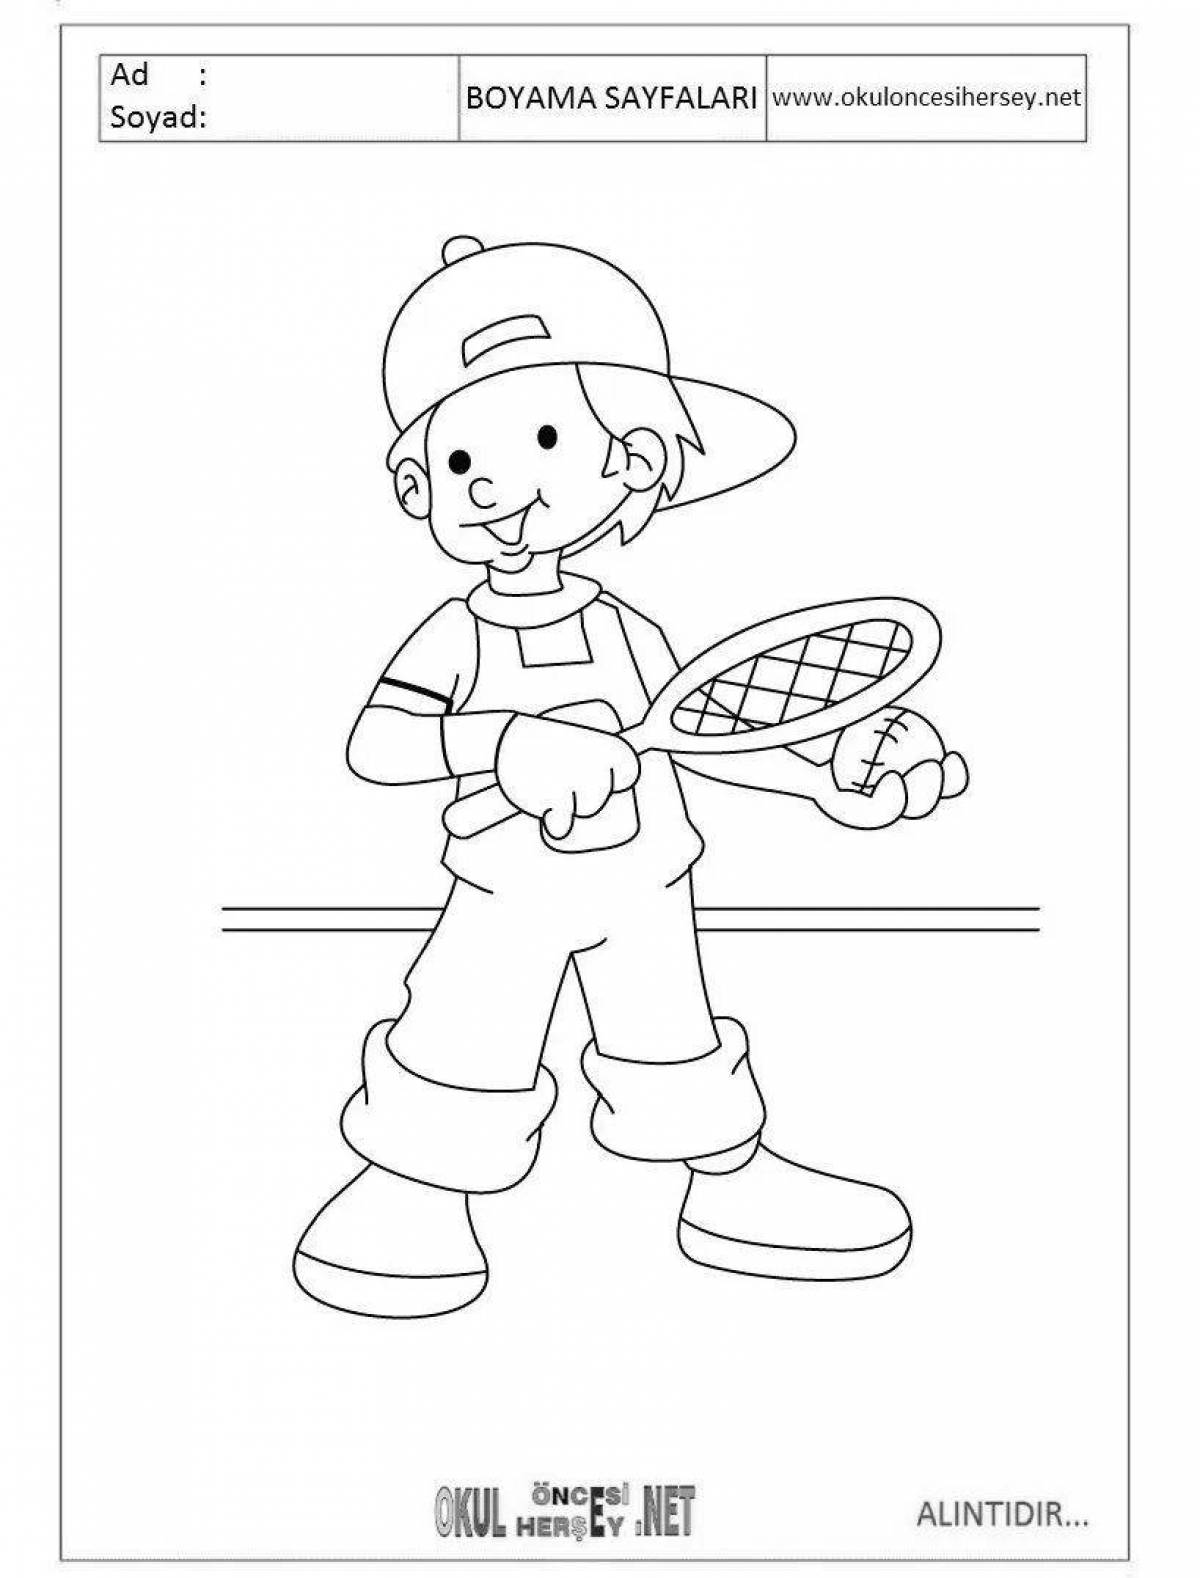 Amazing sports coloring pages for 5-6 year olds